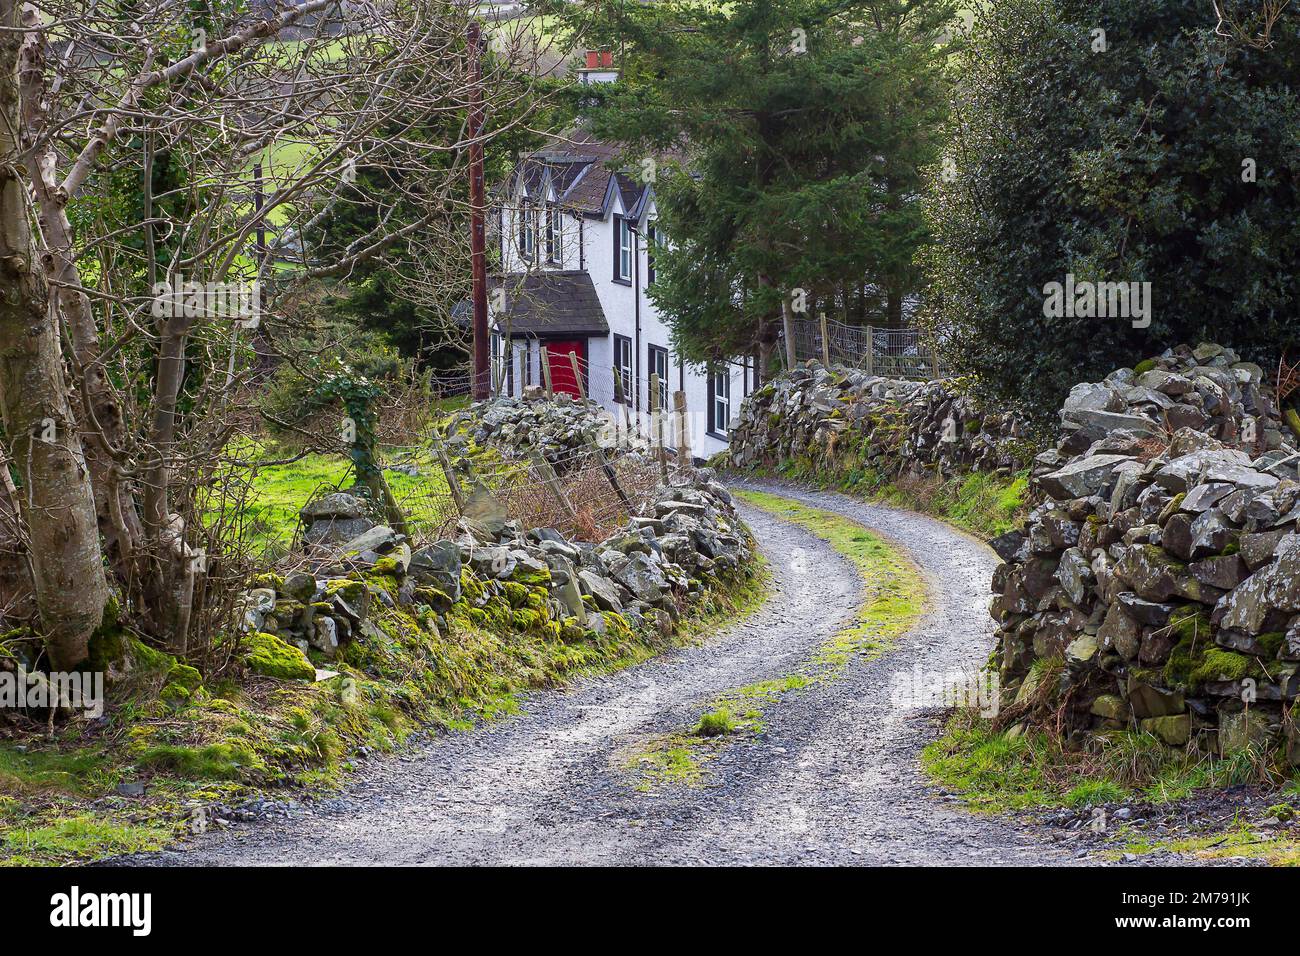 31 Jan 2018, A Large dwelling house located in a narrow country lane in  The Mountains of Mourne with high snow capped mountains in the background in Stock Photo